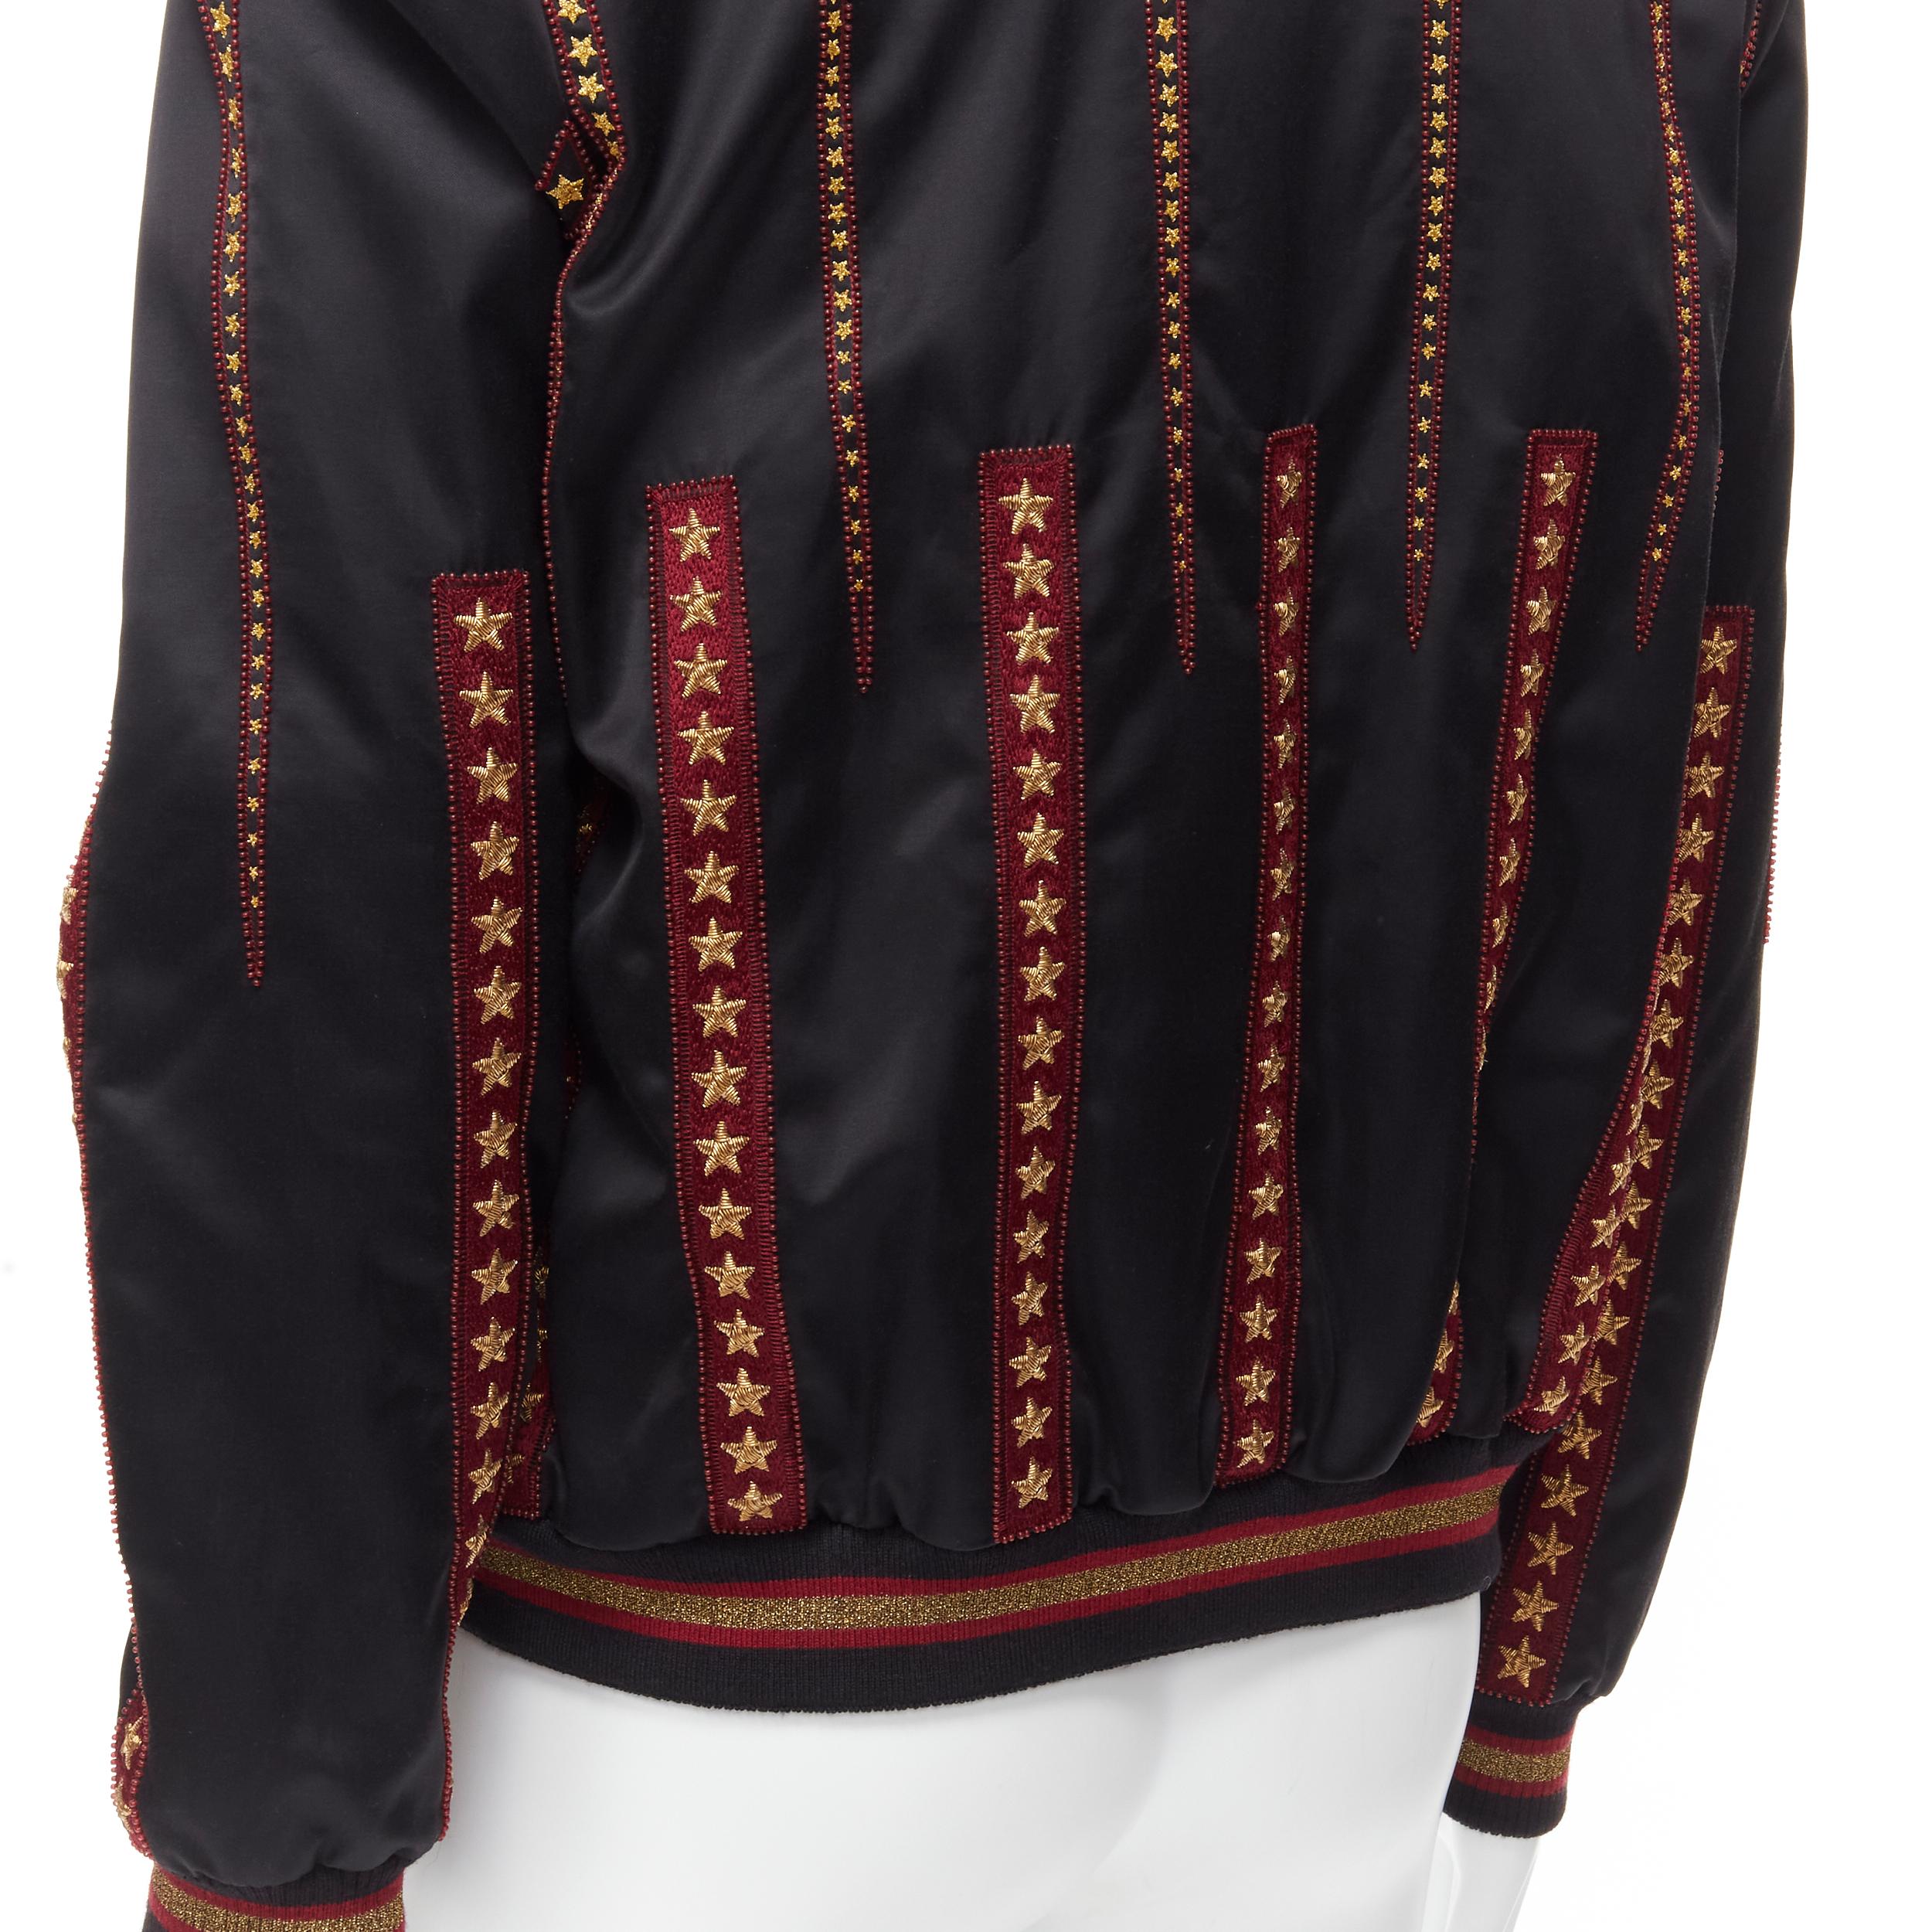 new SAINT LAURENT 2018 Teddy gold star red bead embellished bomber EU52 XL 
Reference: TGAS/B01674 
Brand: Saint Laurent 
Designer: Anthony Vaccarello 
Collection: 2018 Runway 
Material: Satin 
Color: Black 
Pattern: Solid 
Closure: Button 
Extra